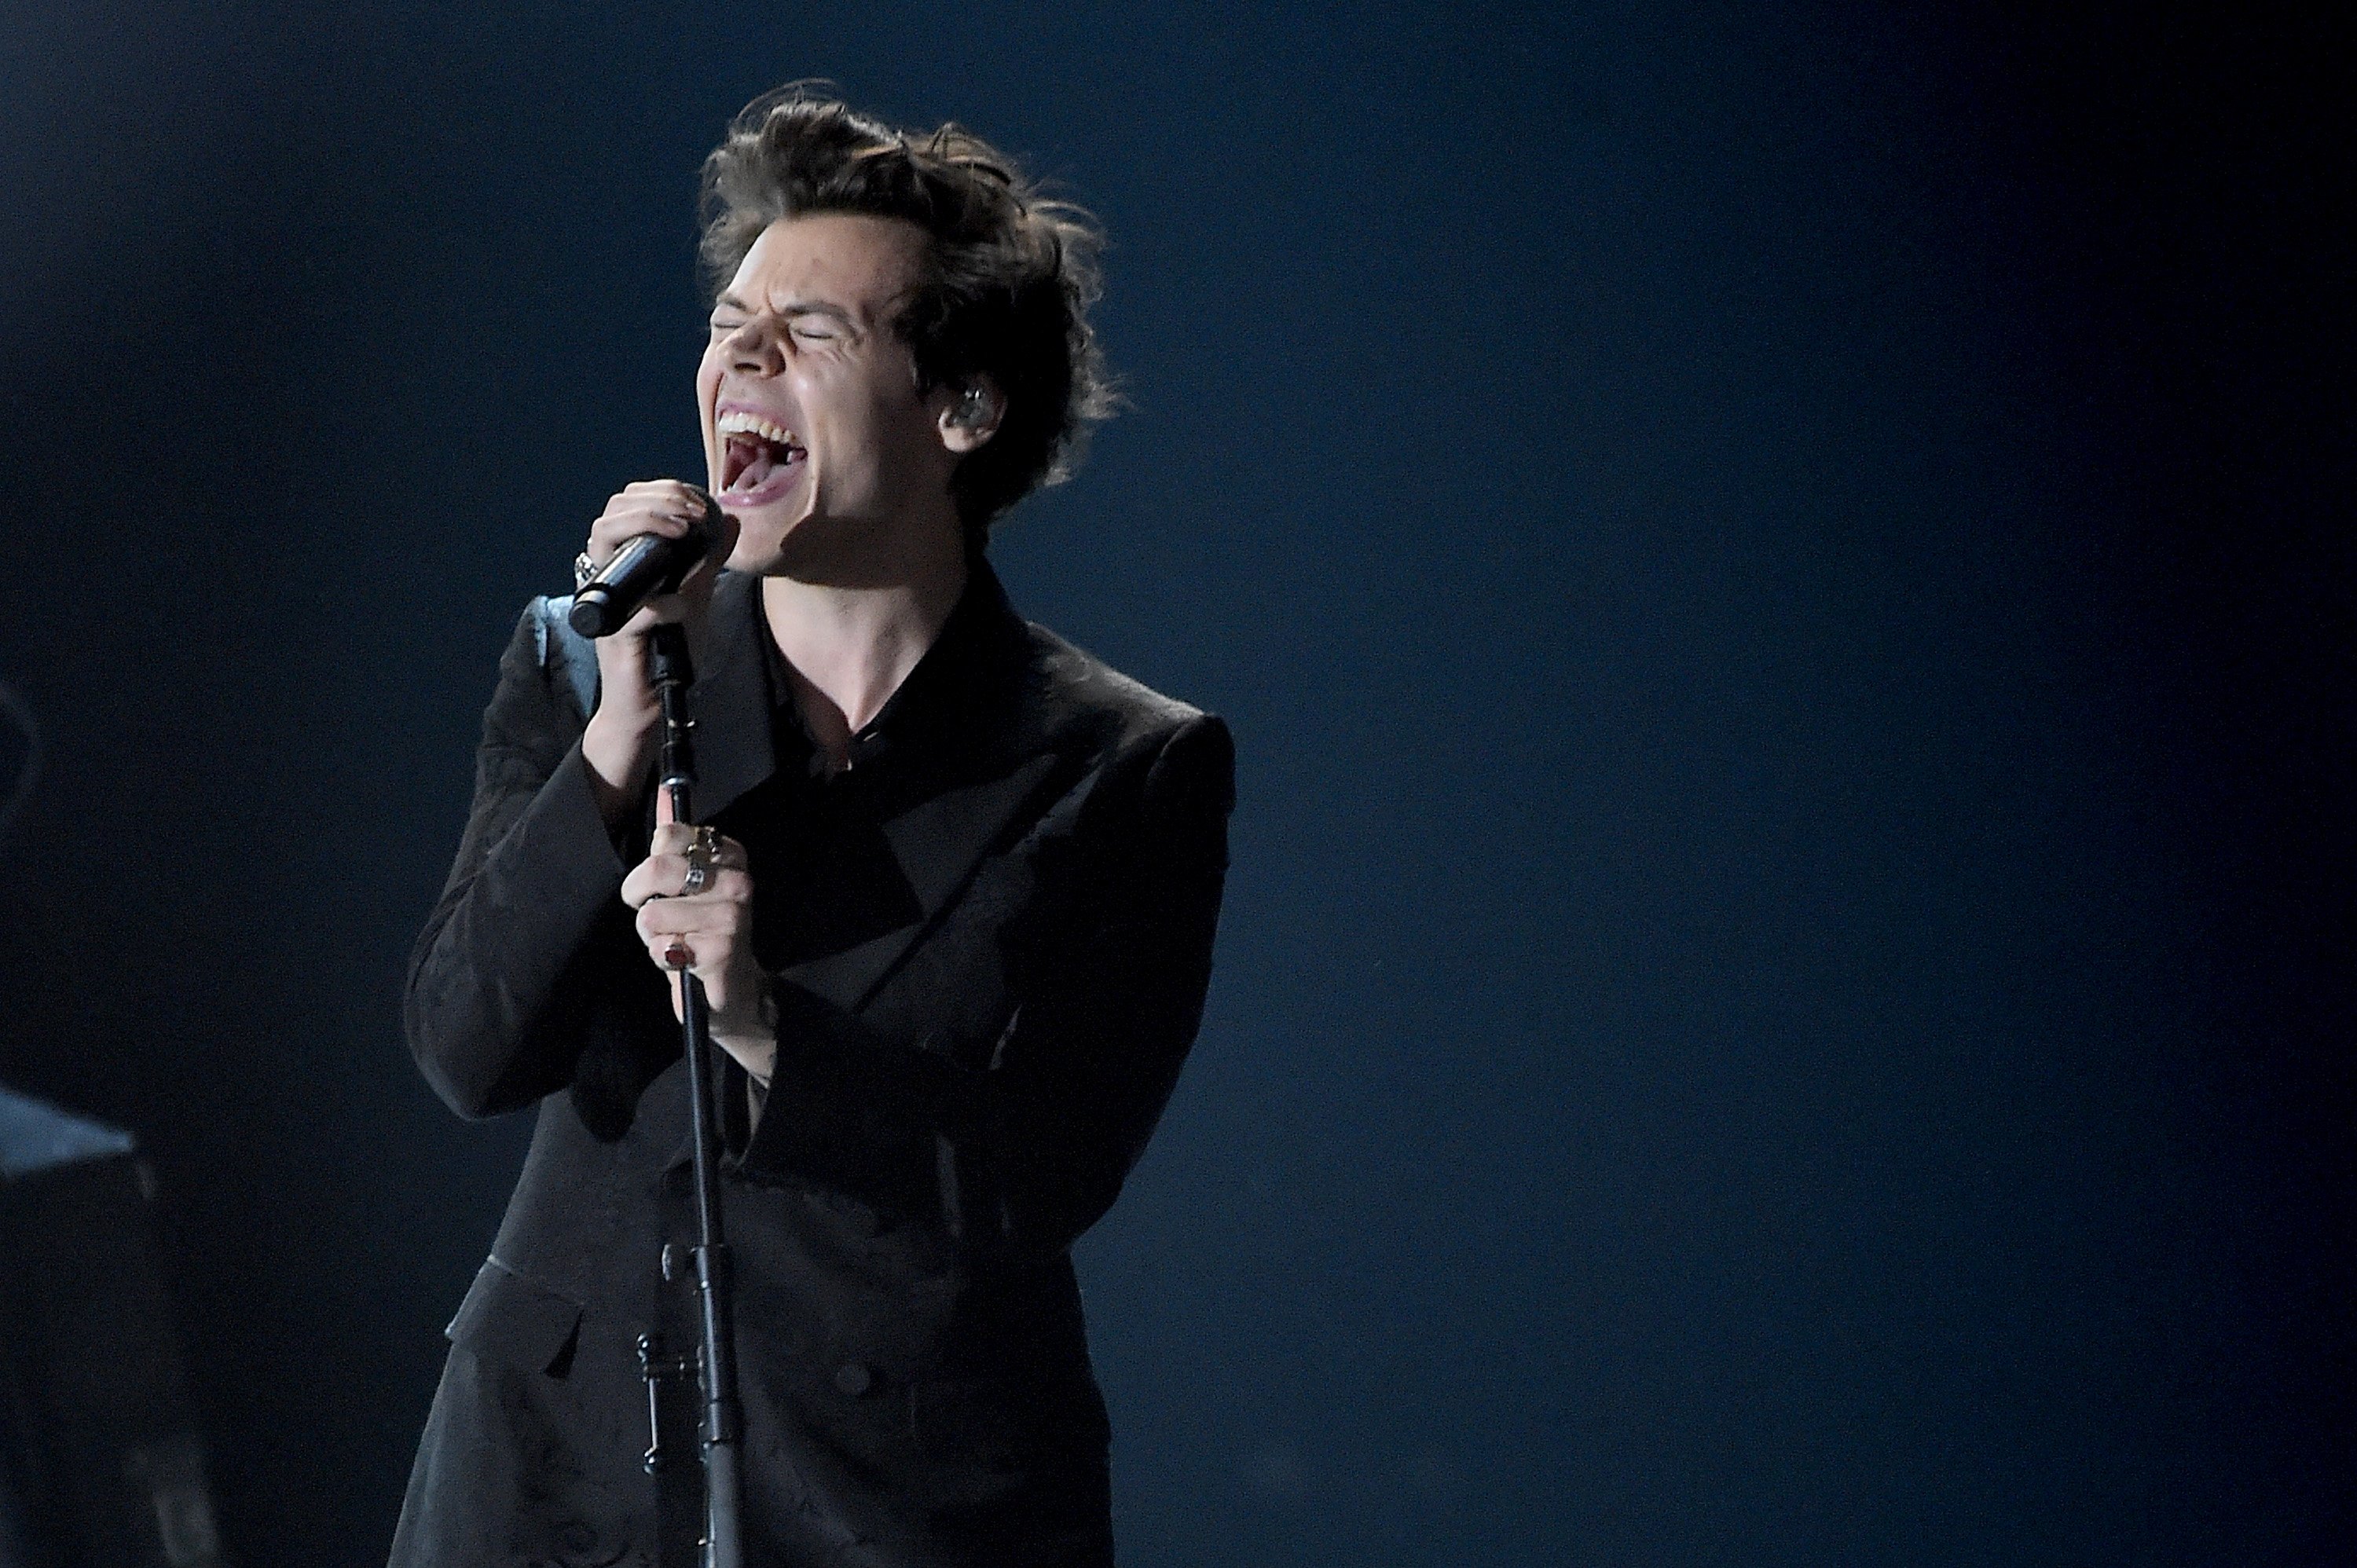 Harry Styles singing into a microphone